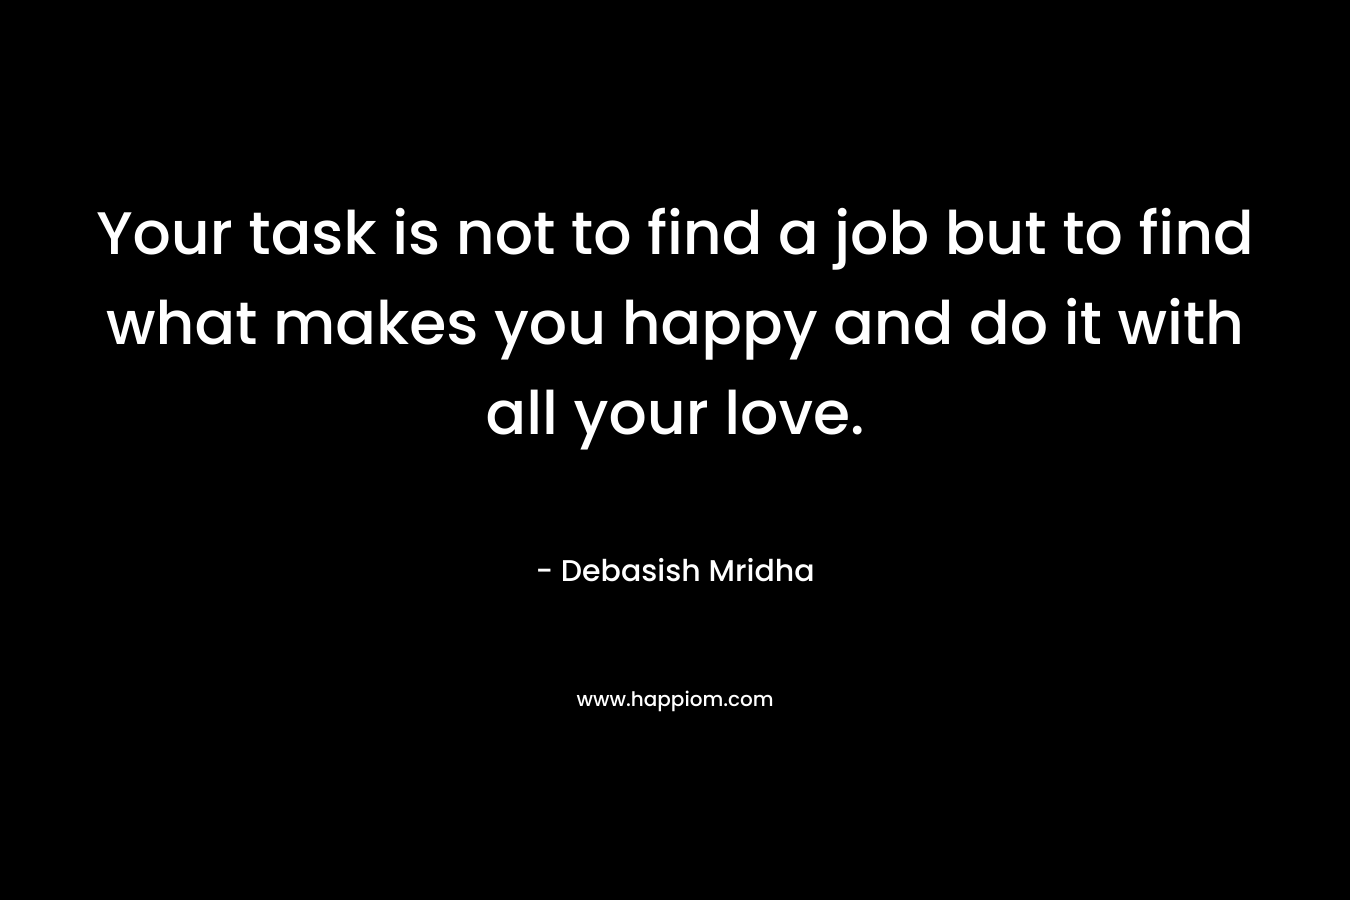 Your task is not to find a job but to find what makes you happy and do it with all your love.